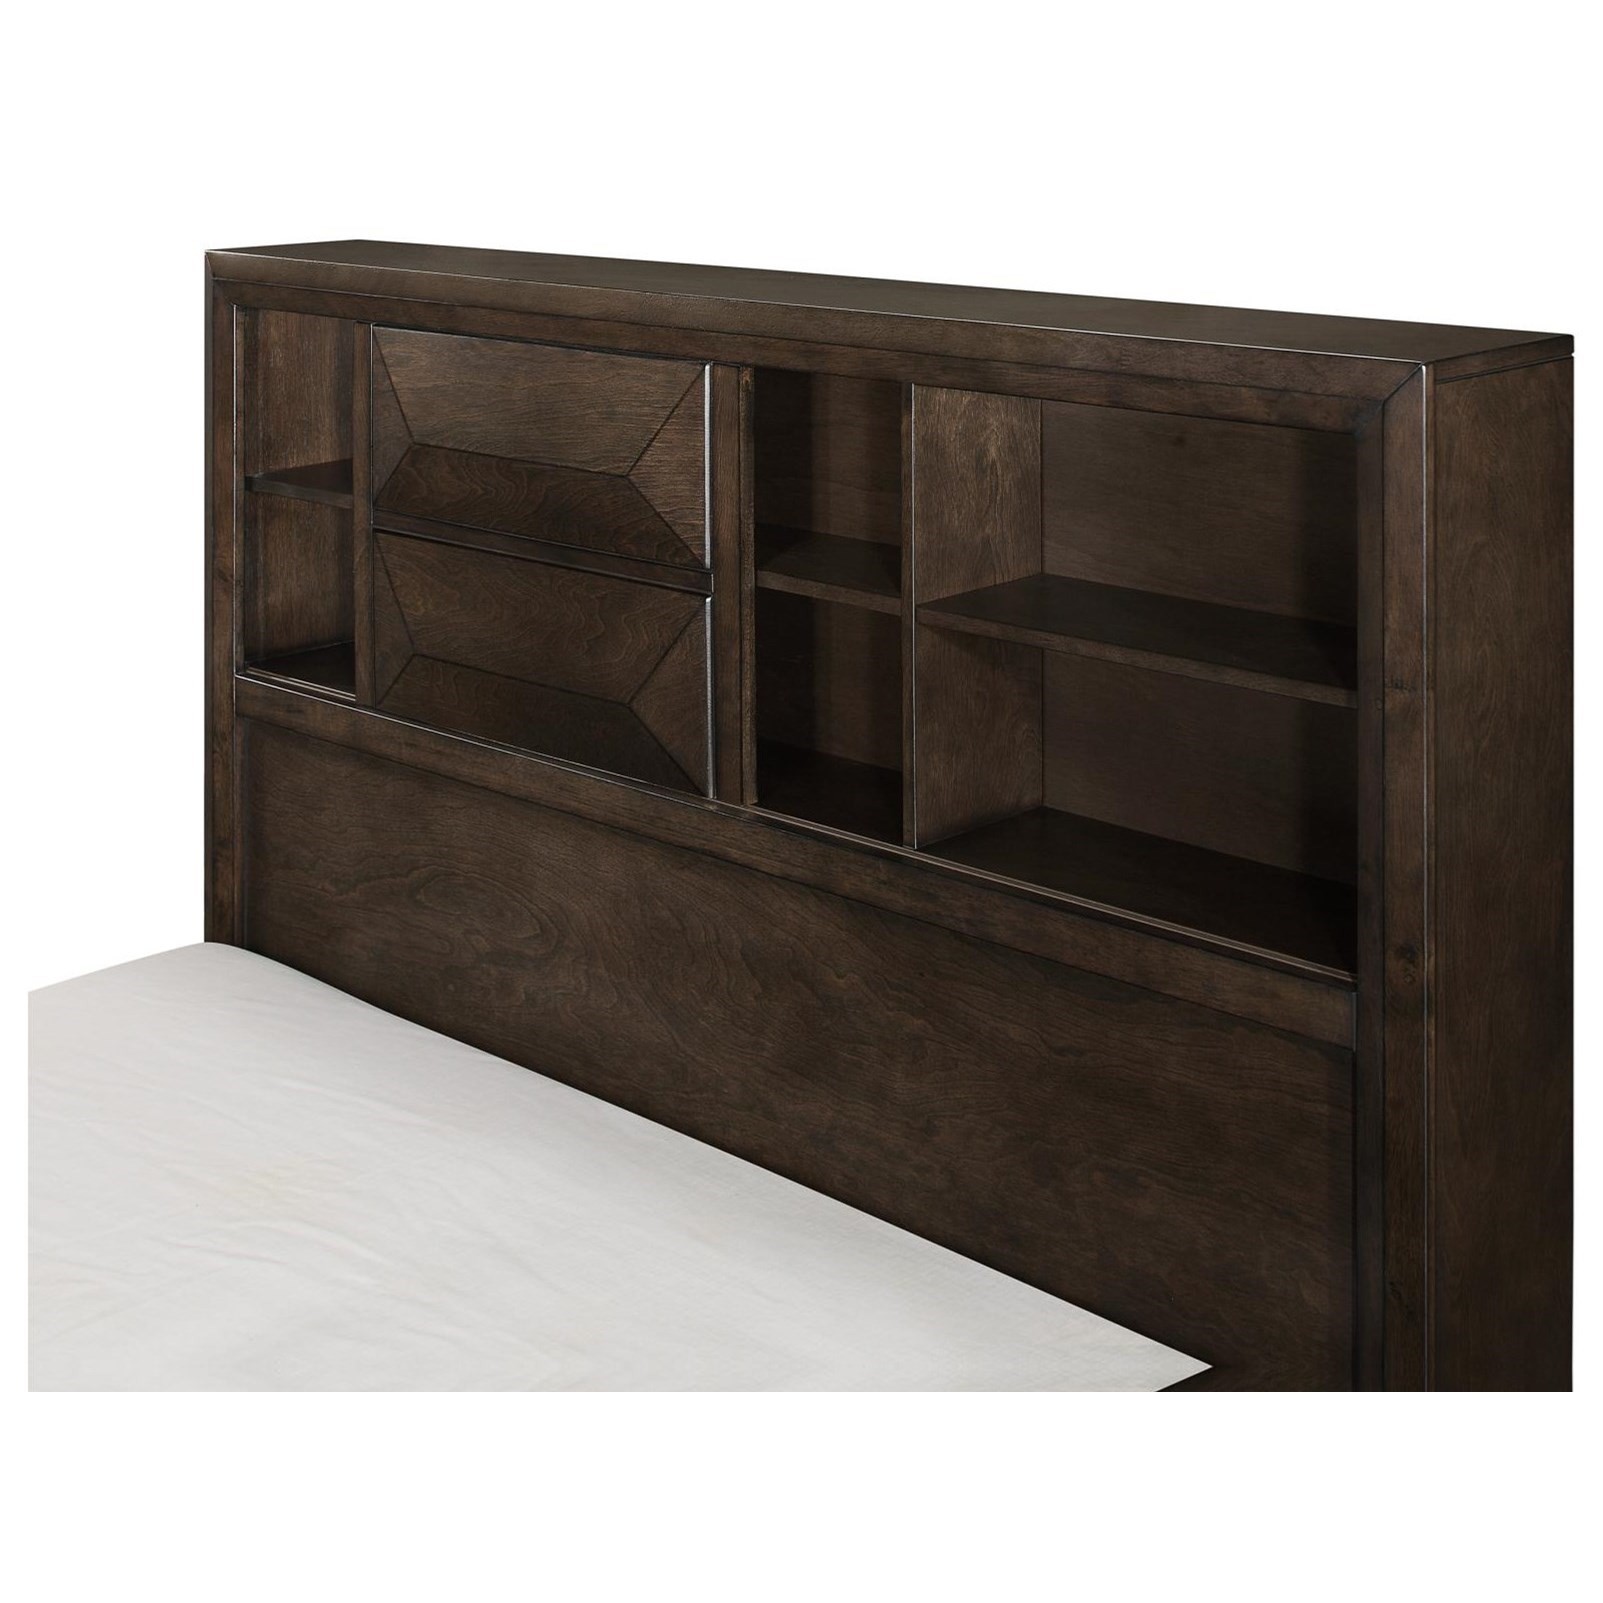 Homelegance chesky contemporary california king bookcase 1